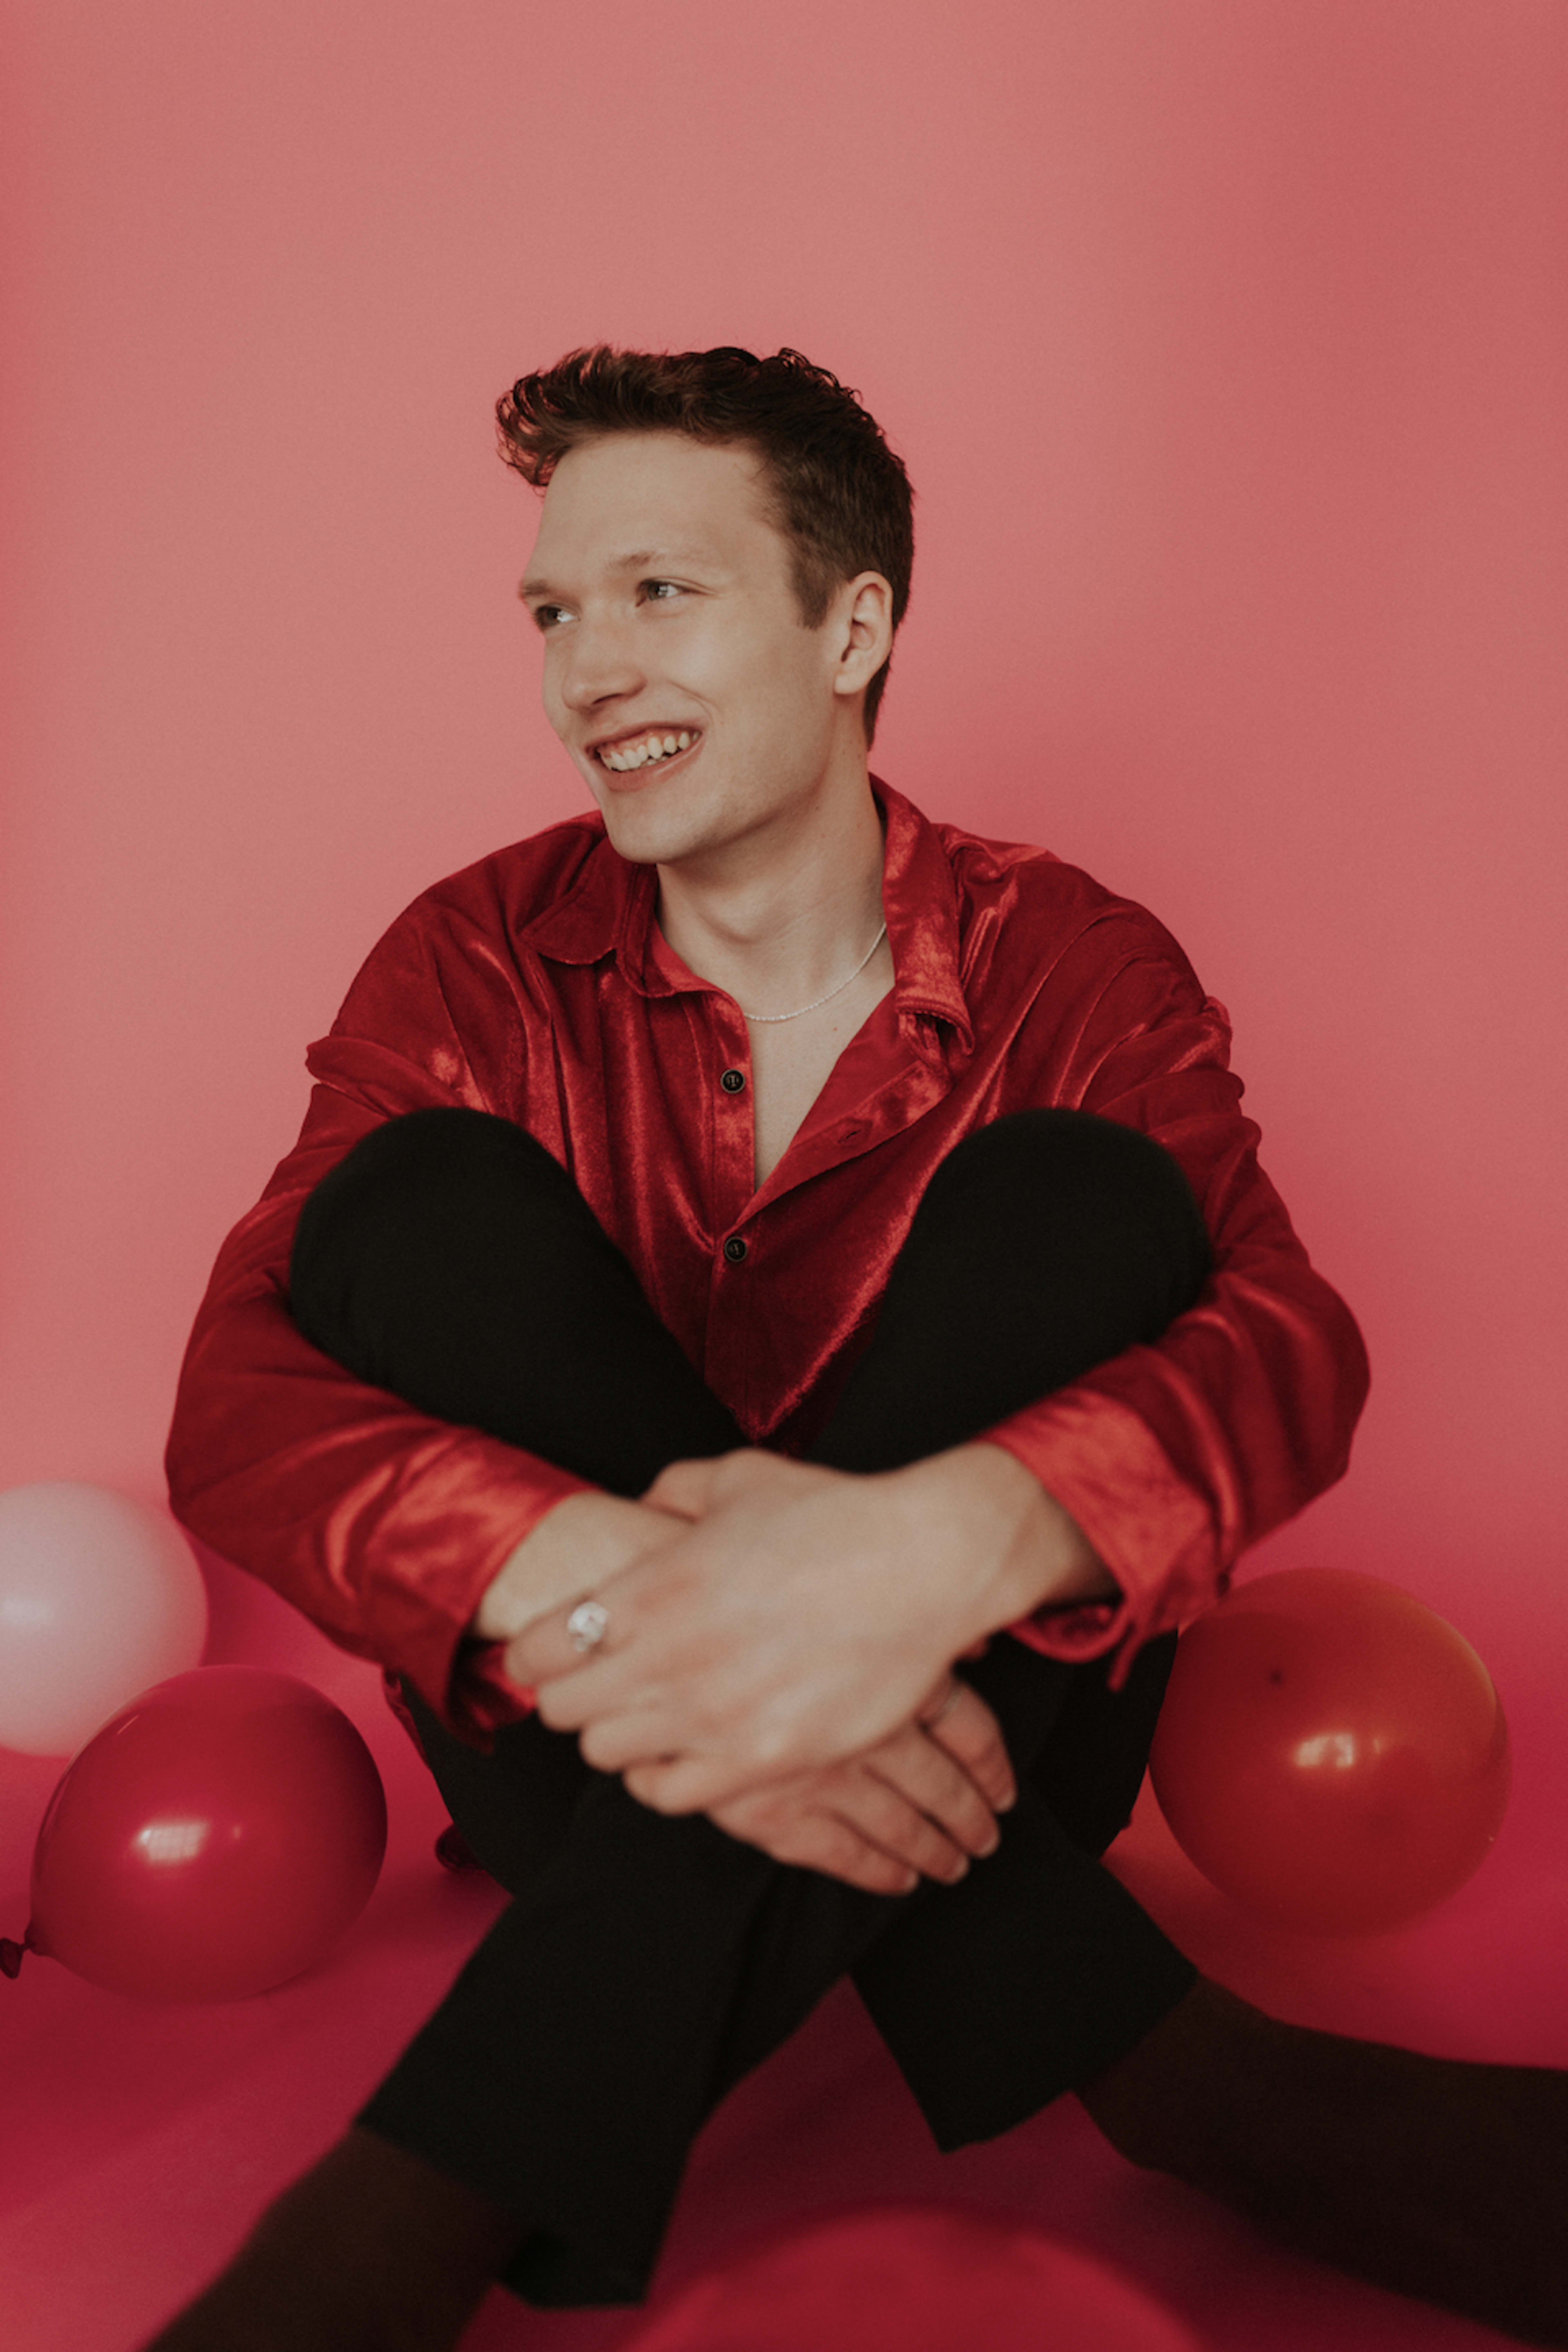 A fashion photoshoot of a person on the floor surrounded by pink and red balloons.